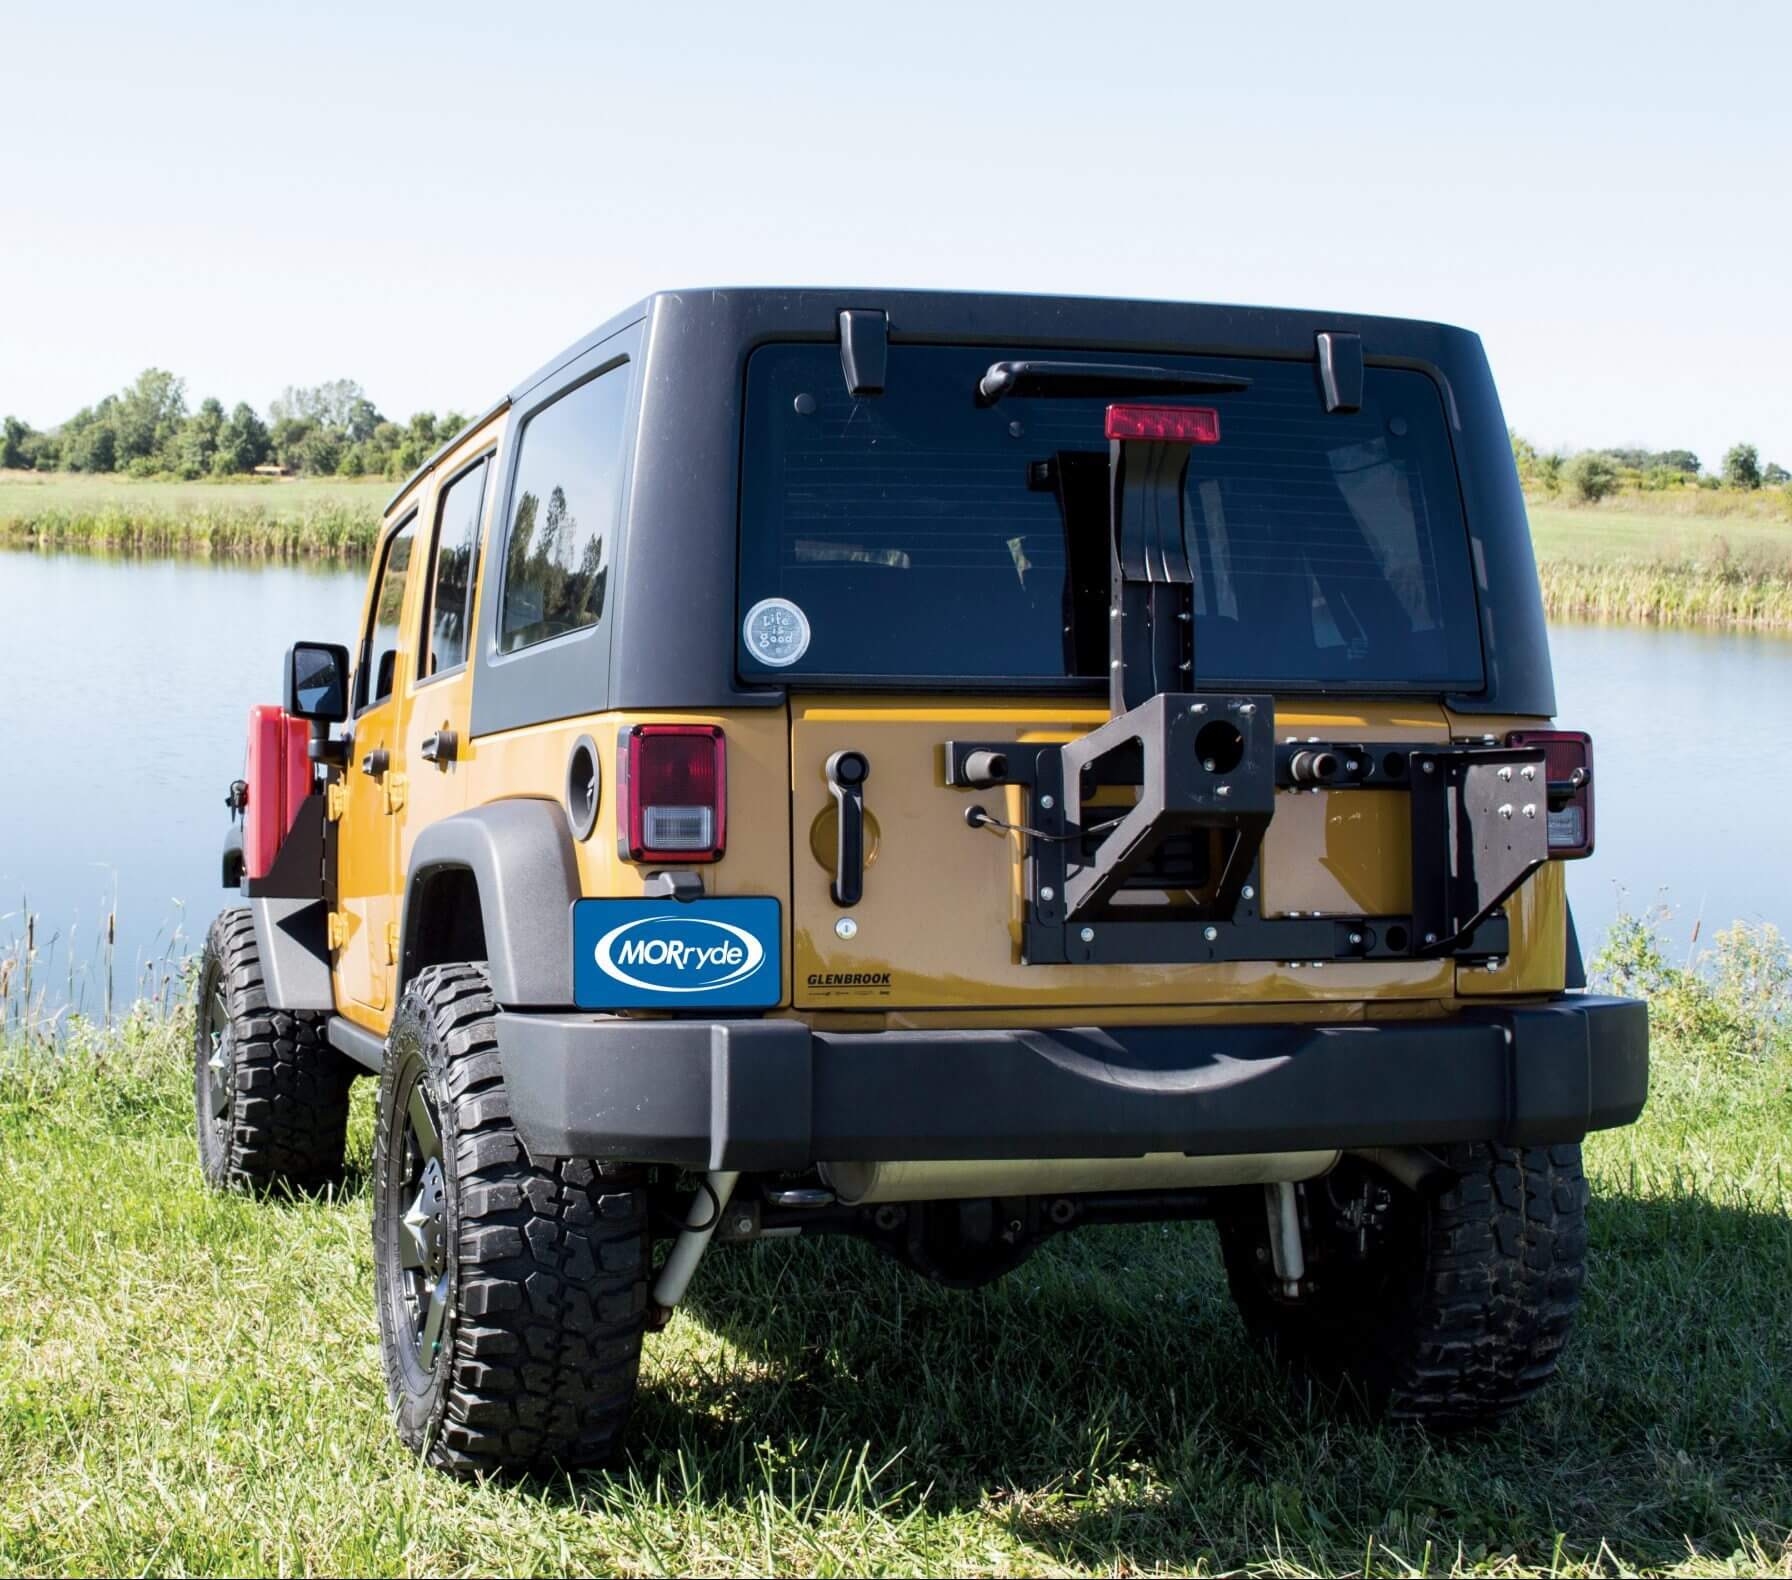 Best aftermarket heavy duty spare tire carrier and hinges? | Jeep Wrangler  JK Forum